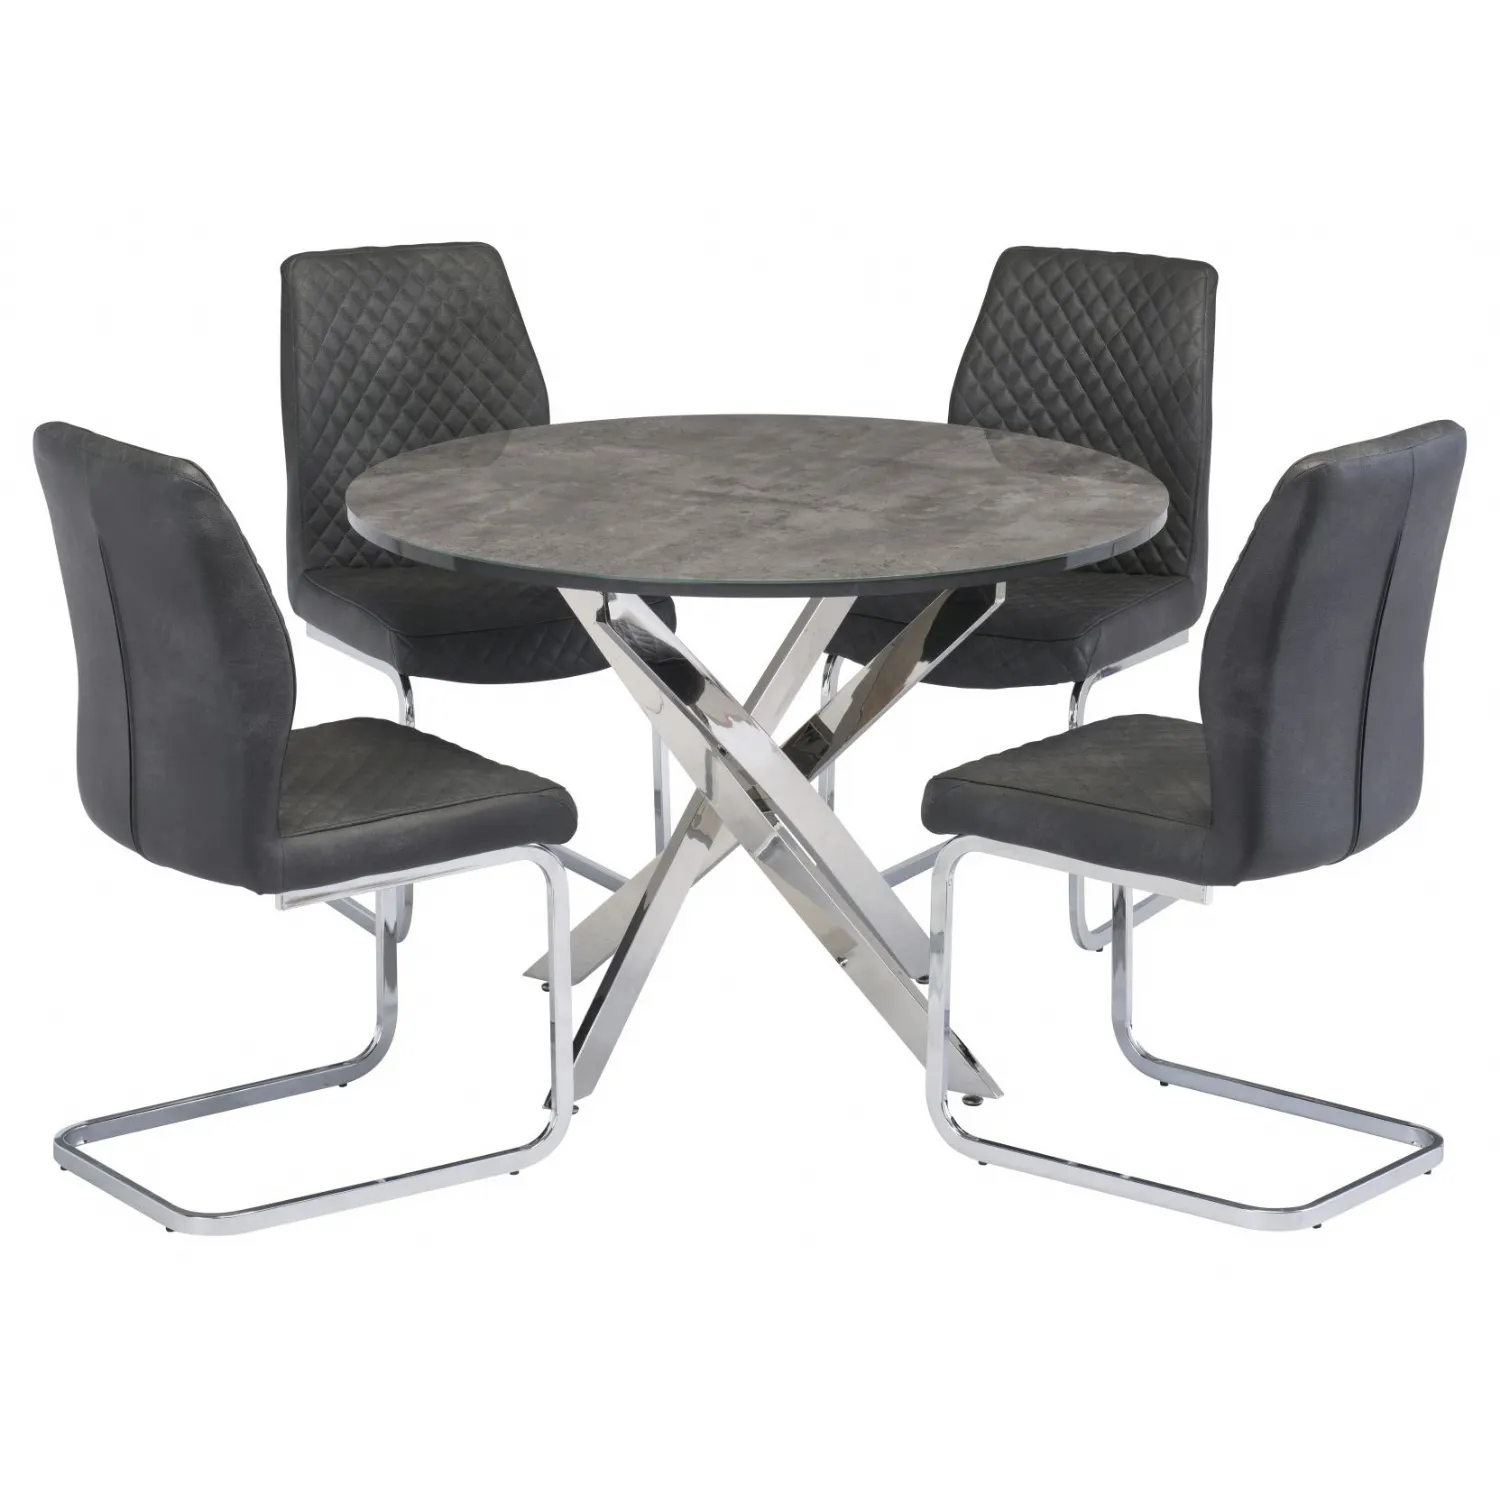 Grey Ceramic Top Round Dining Table and 4 Dining Chairs Set